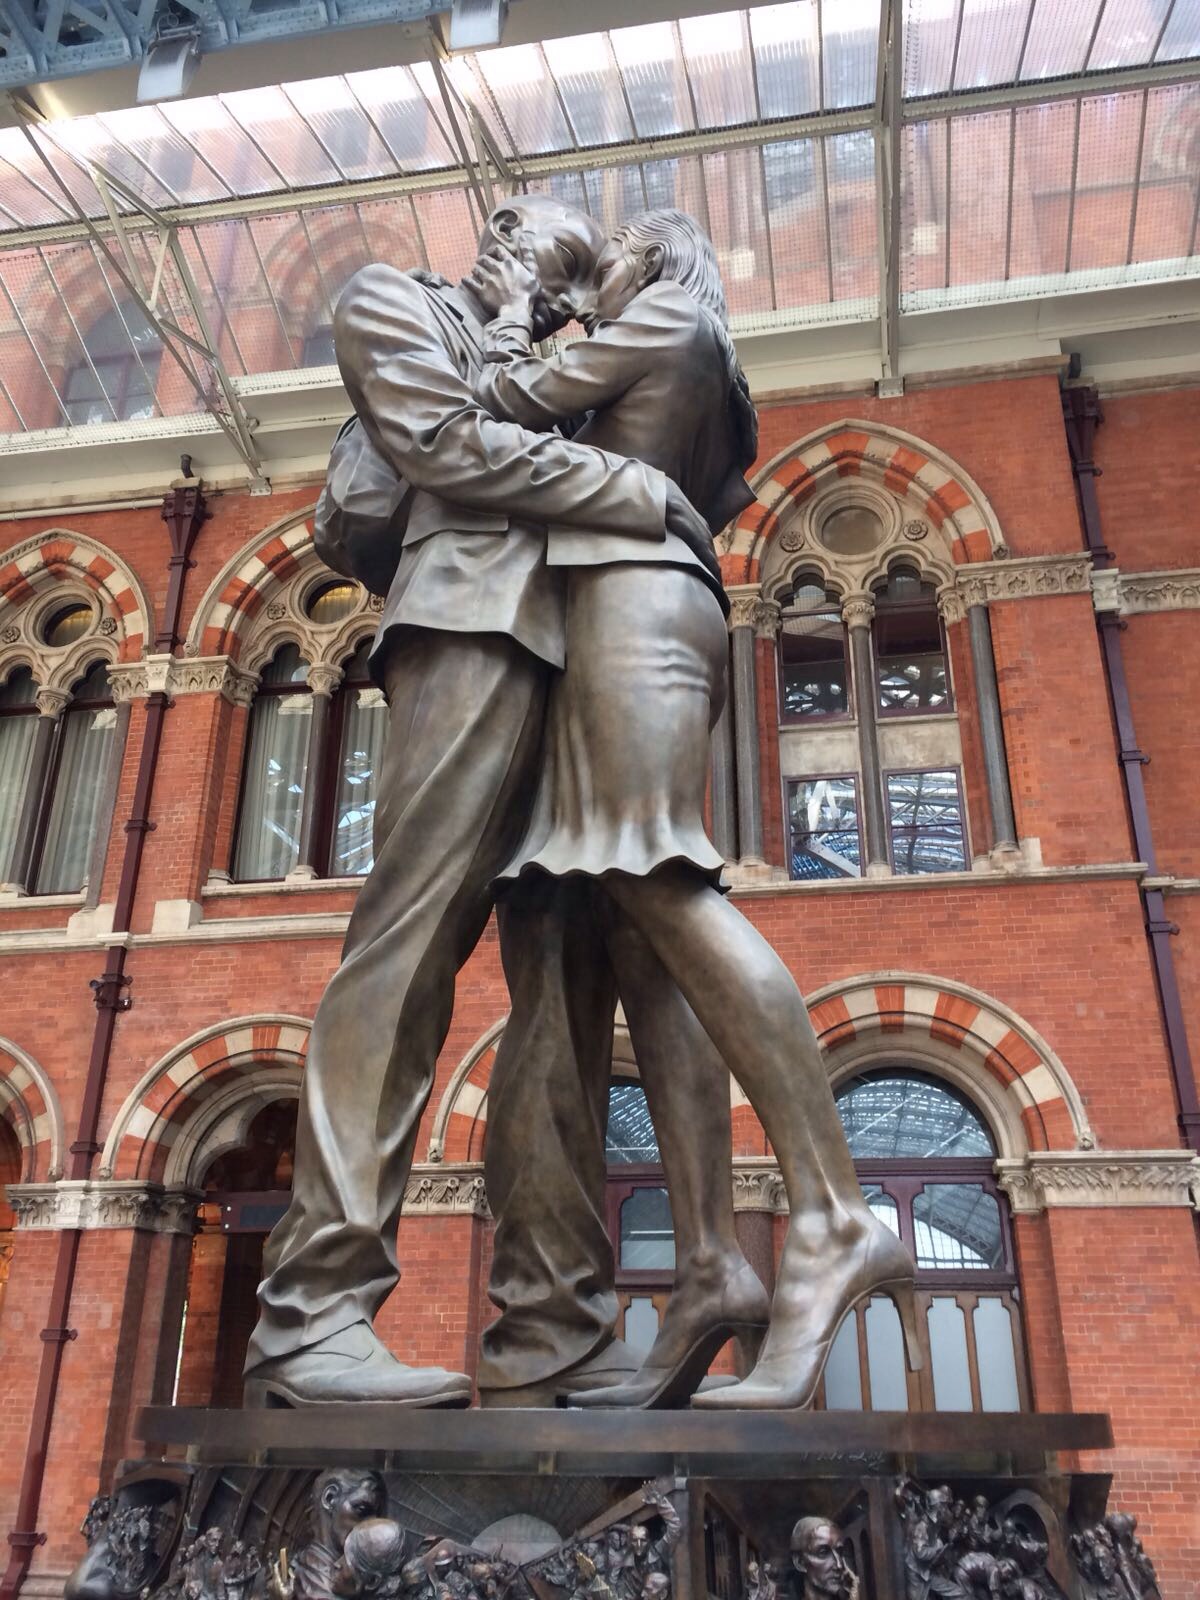 Sir John Betjeman and  an embracing couple  are amongst the icons at  the Meeting Place  St.Pancras Station. Top Tip : you don't have to meet anyone there to enjoy the sculpture